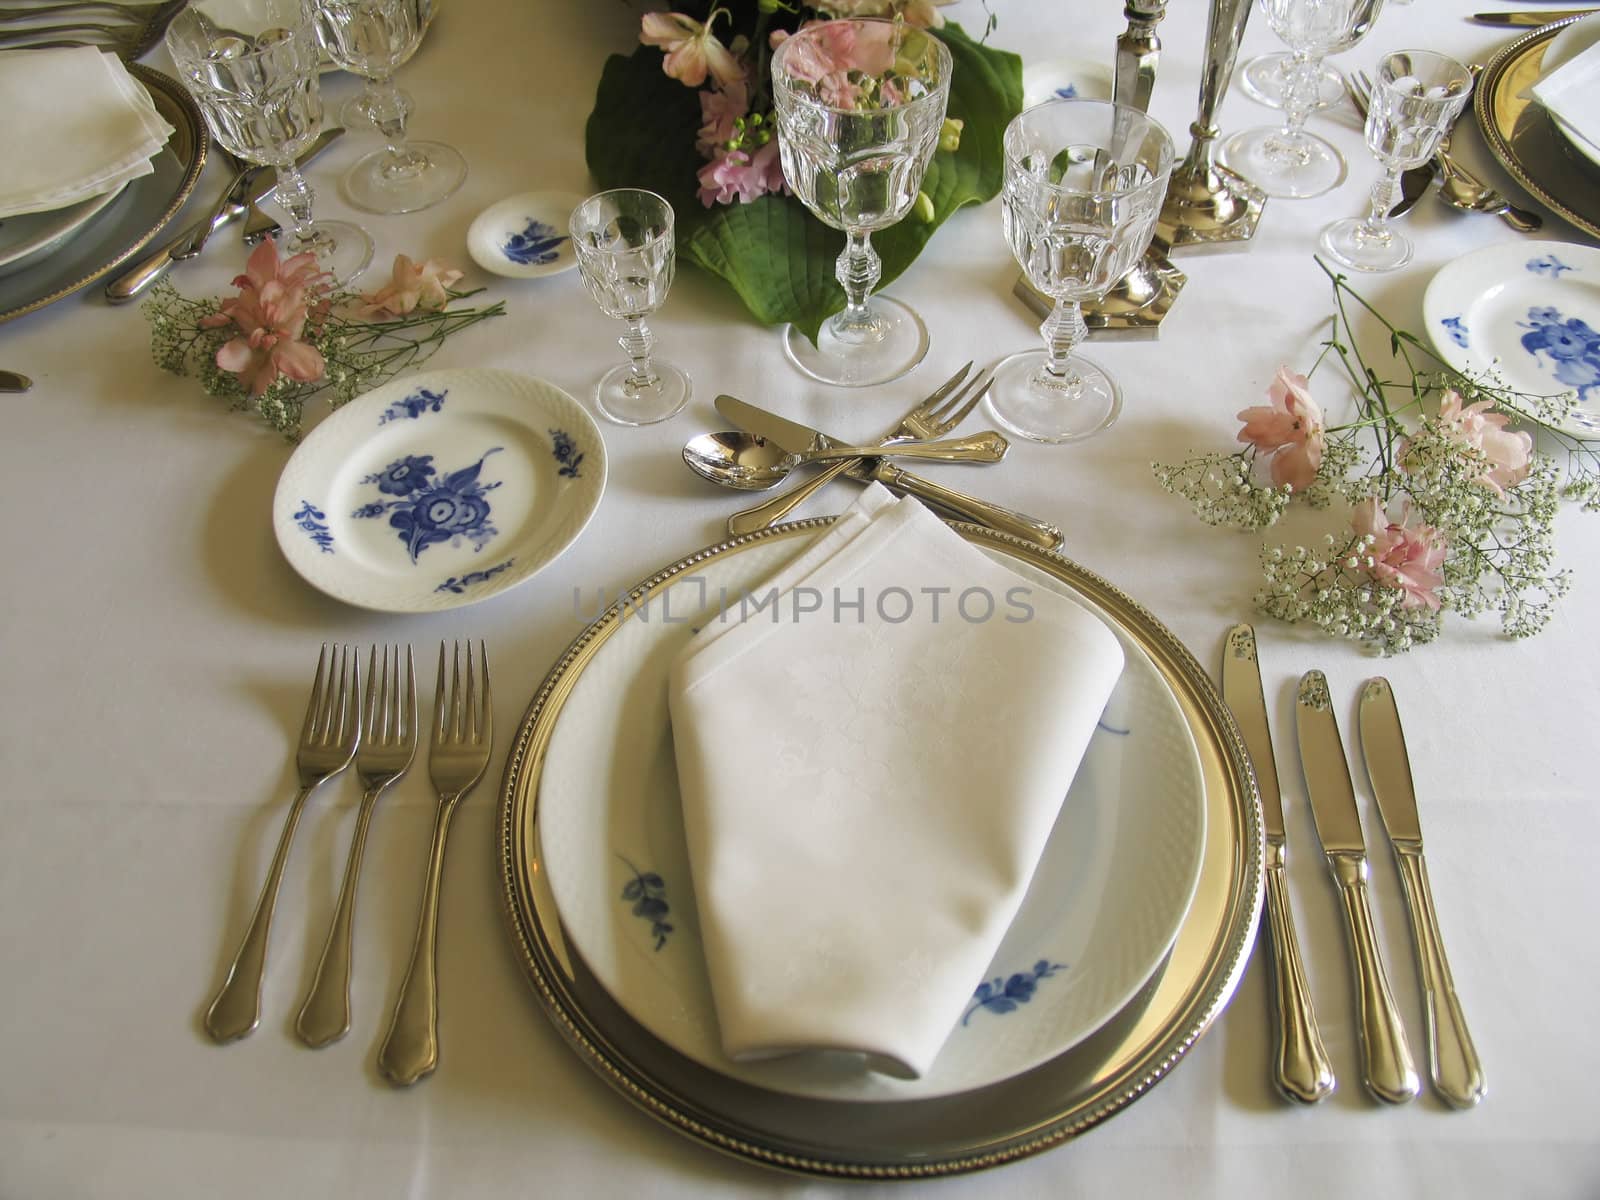 A beautiful laid dinnertable in retro style with very old silver, glasses and porcelain.